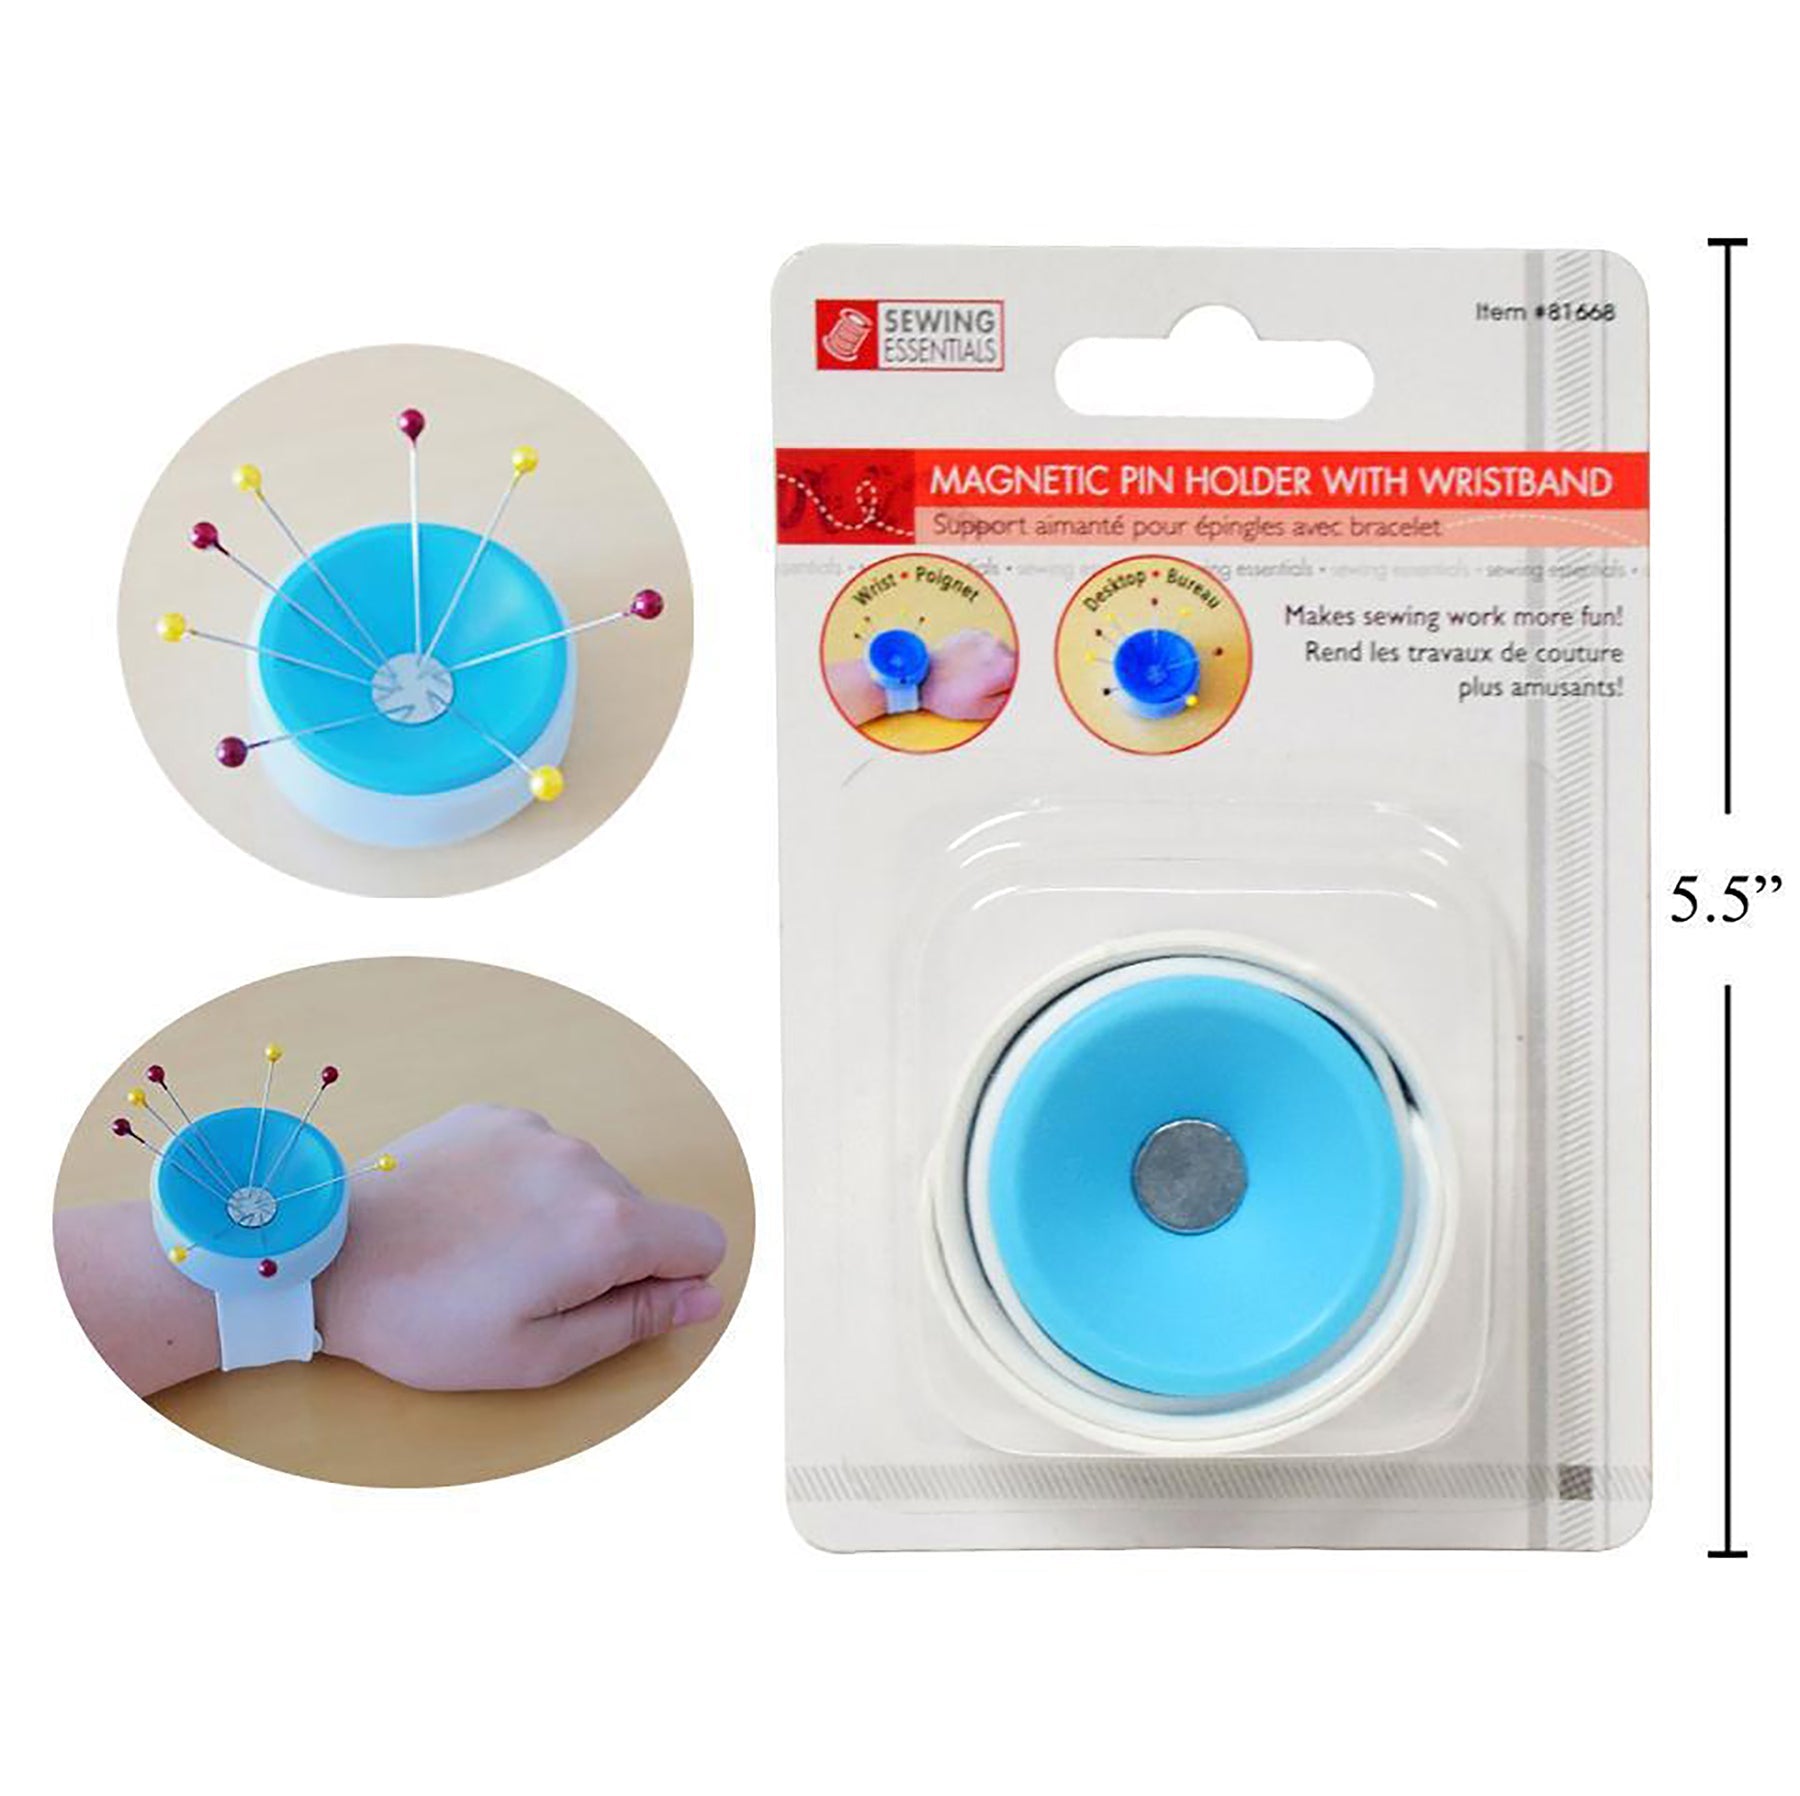 Sewing Essentials Magnetic Pin Holder with Wristband 1.75in